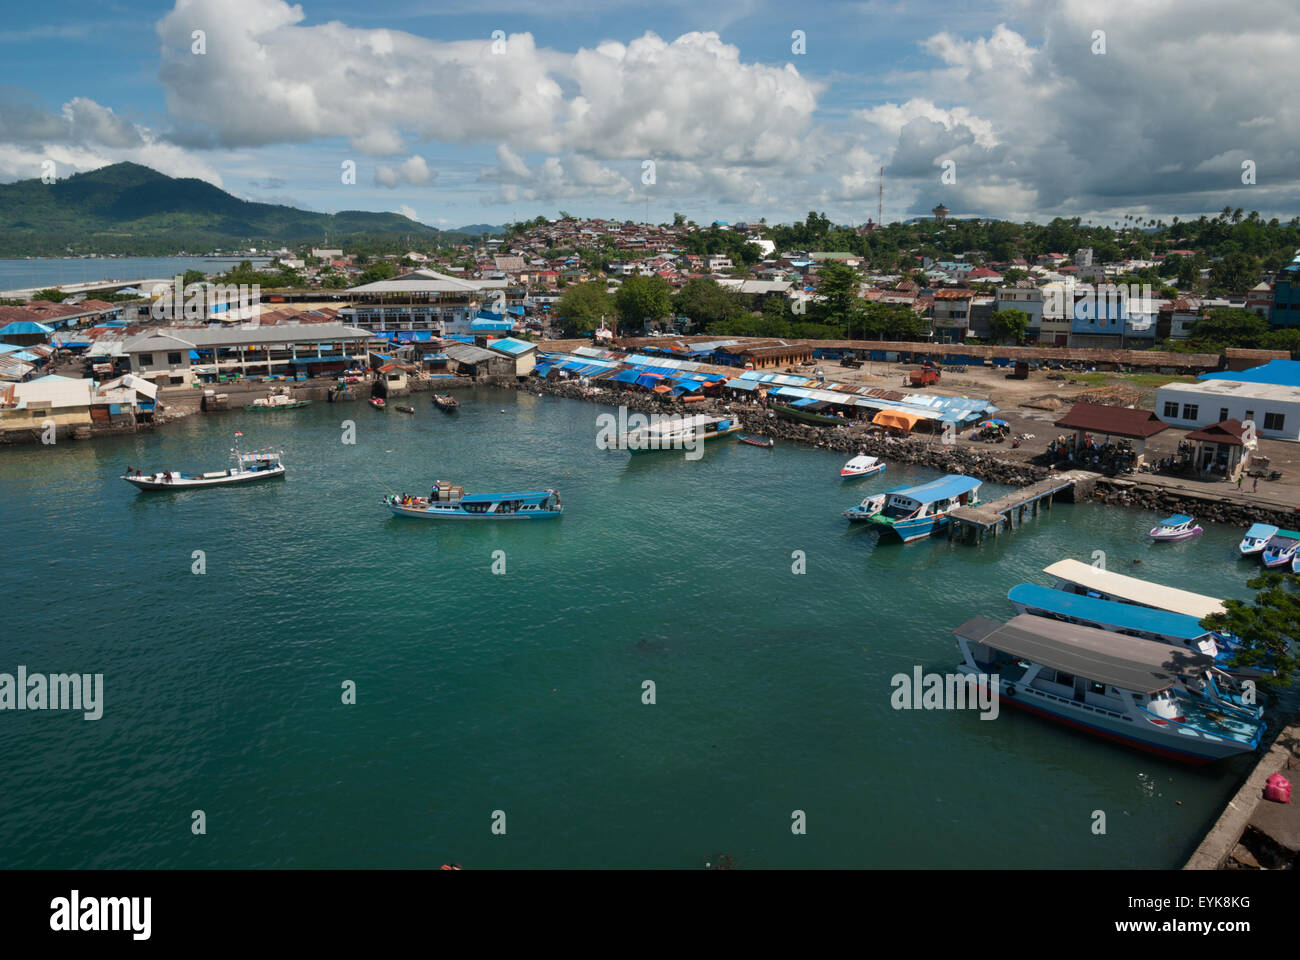 Boats, coastal water and part of the coastal landscape of Manado City in North Sulawesi, Indonesia. Stock Photo